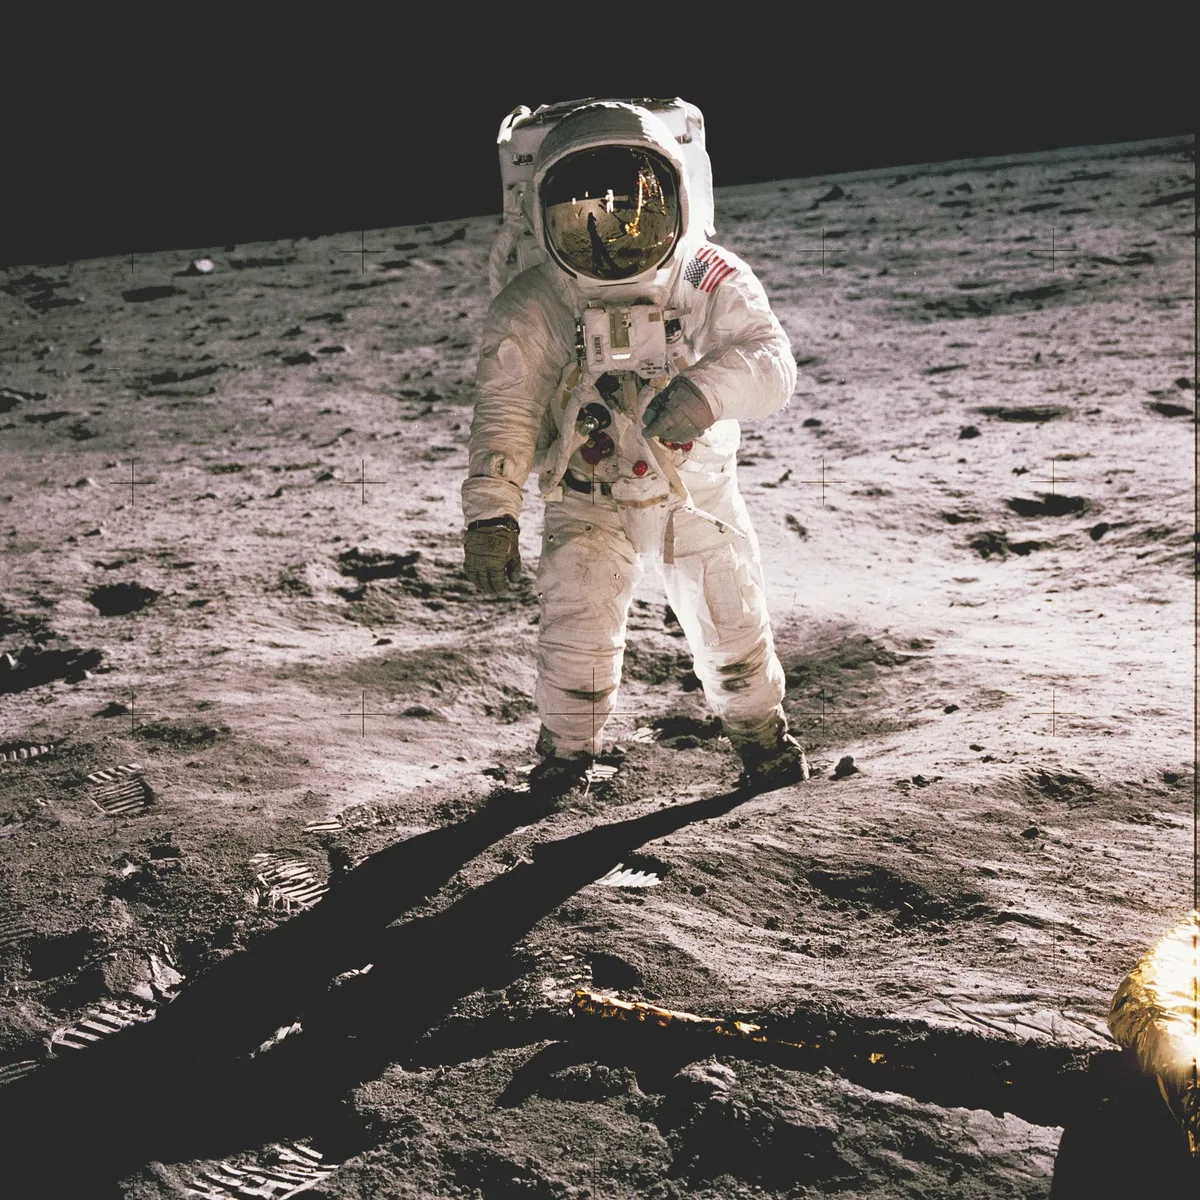 Aldrin photographed by Armstrong during their moonwalk © NASA/JSC